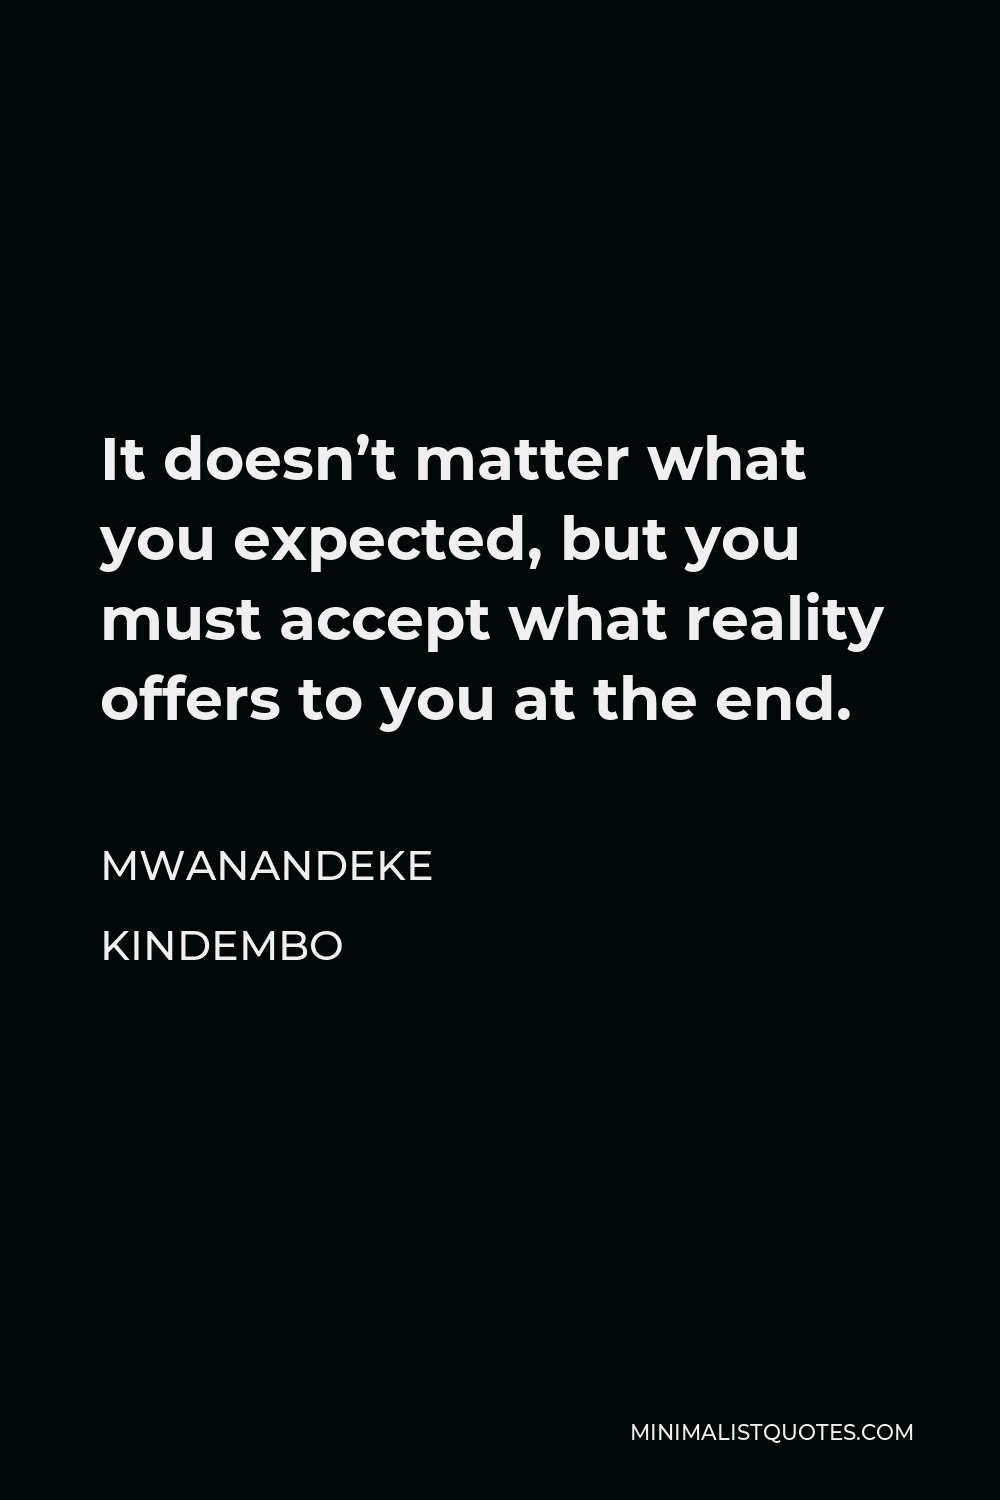 Mwanandeke Kindembo Quote - It doesn’t matter what you expected, but you must accept what reality offers to you at the end.